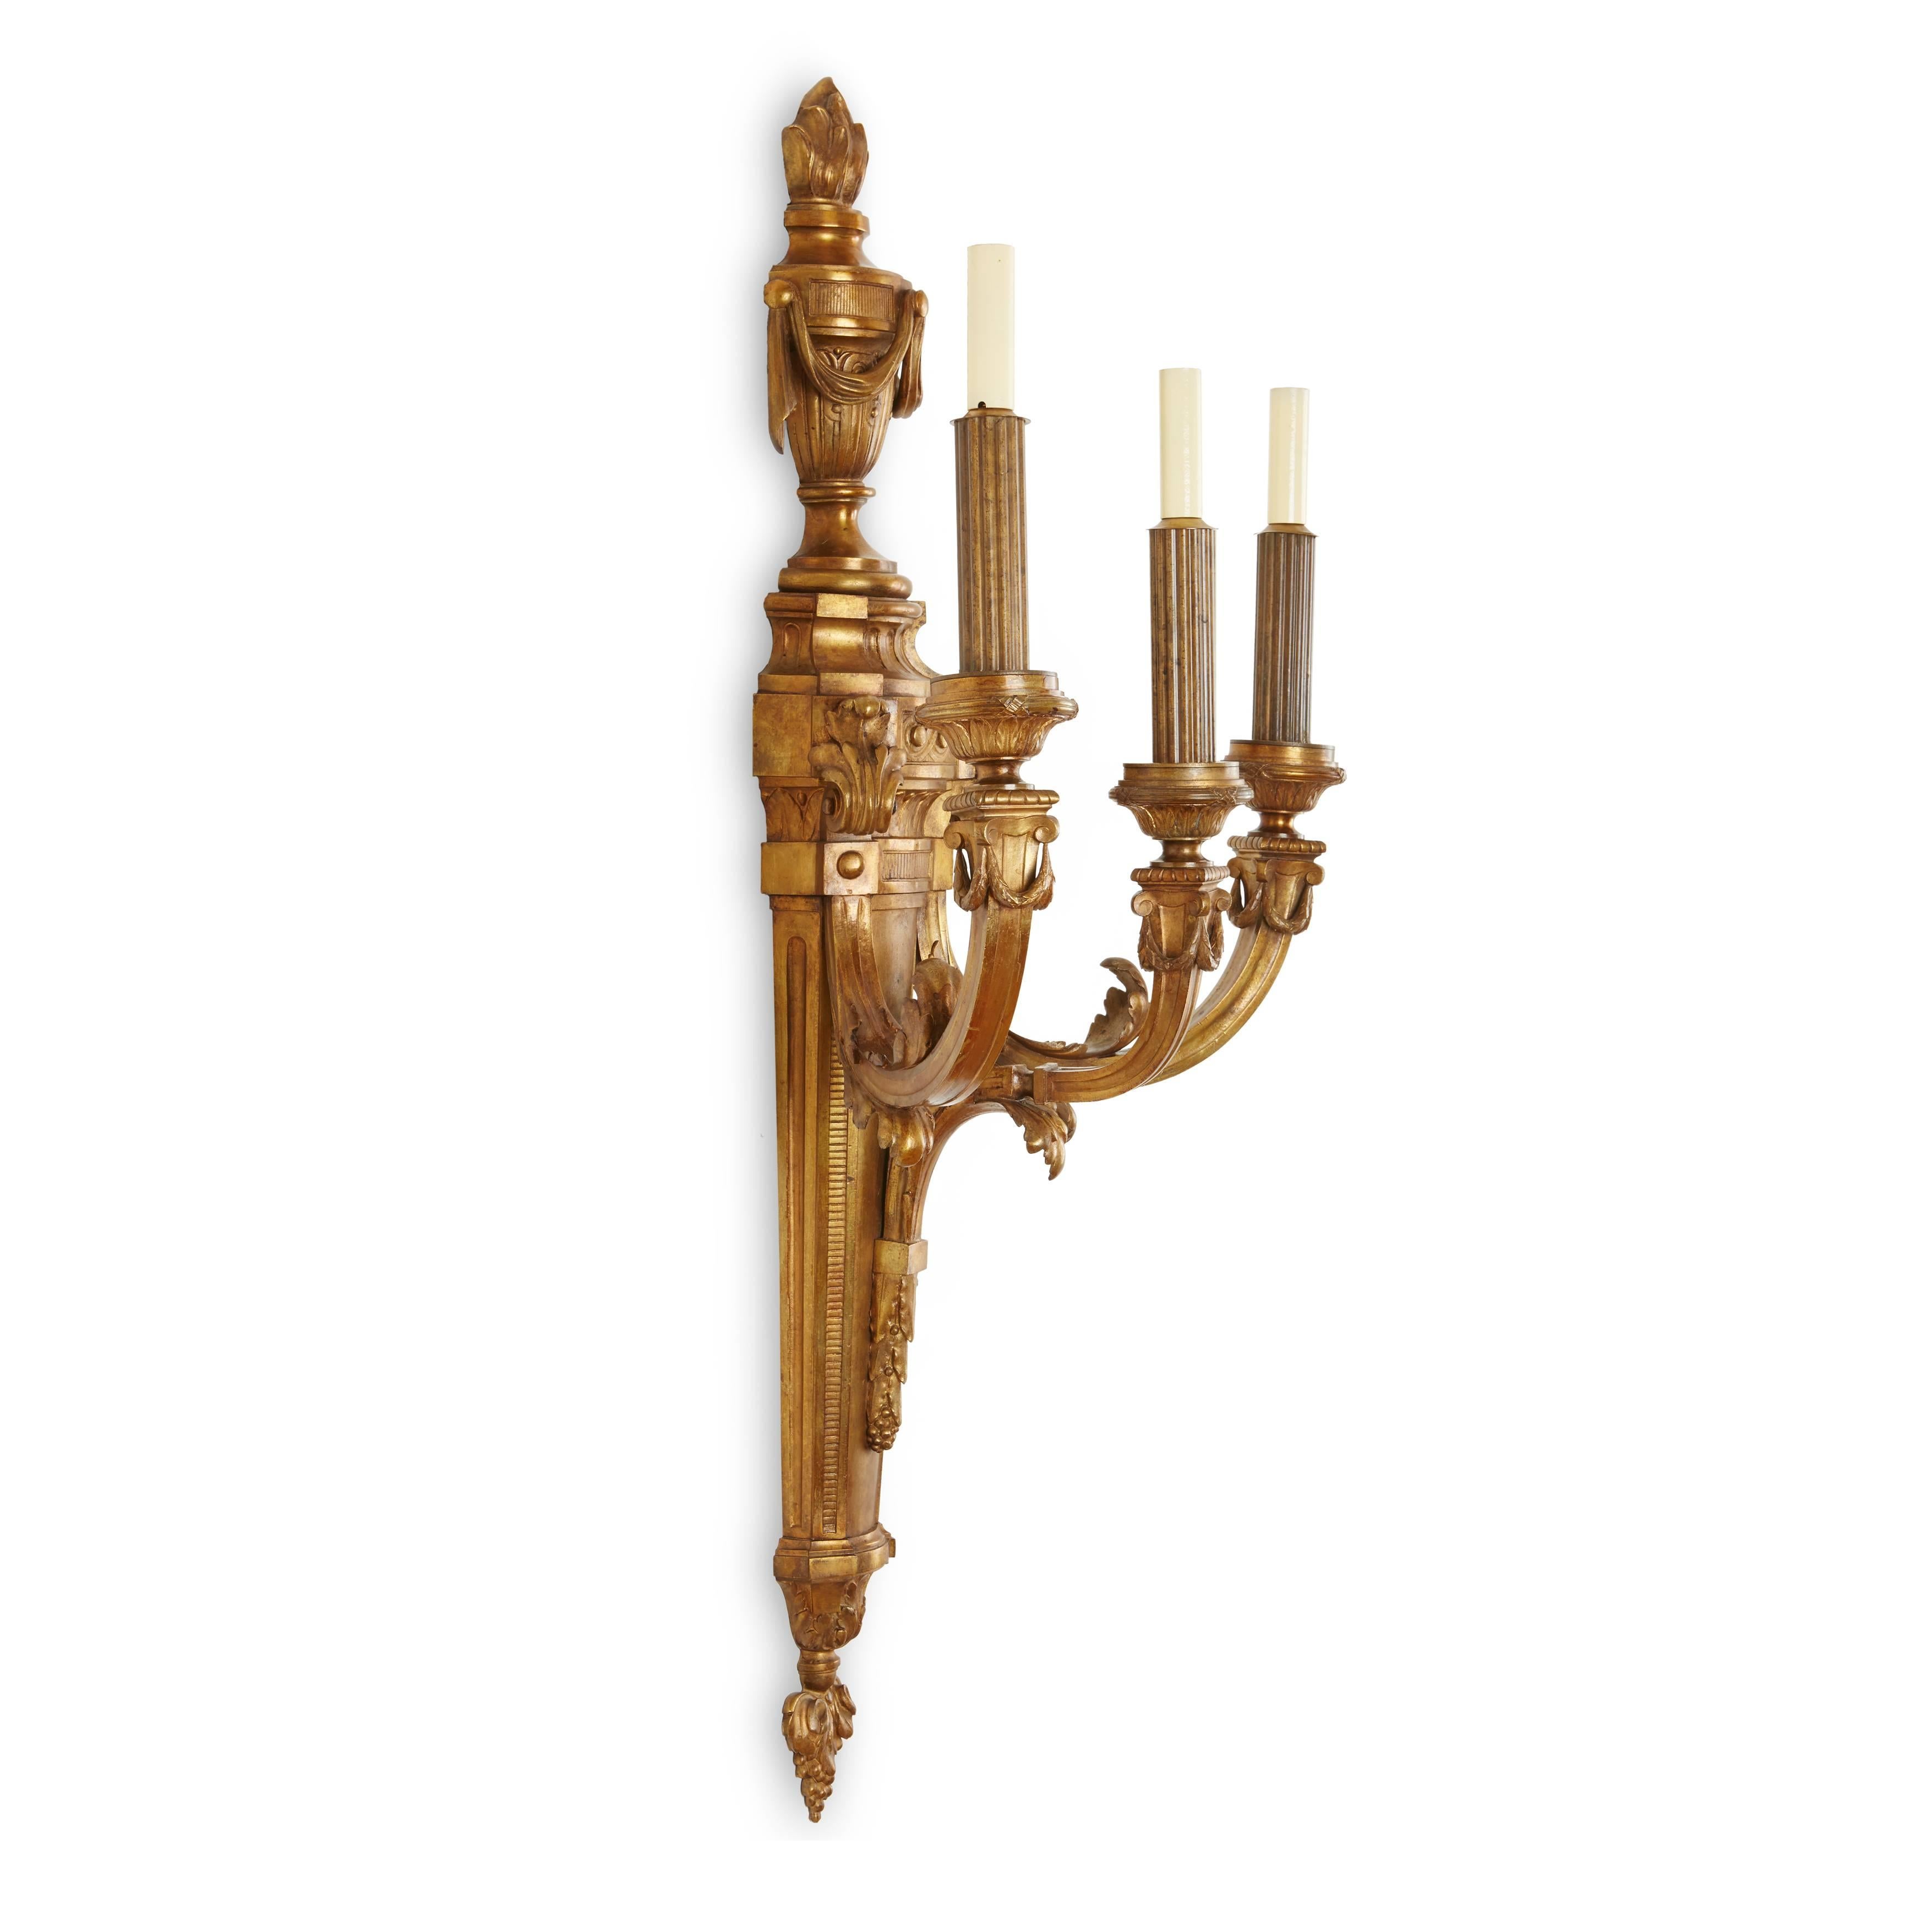 Each backplate surmounted by a flaming swagged urn on a tapering pedestal, with three acanthus-clasped scrolled branches with reeded columns.